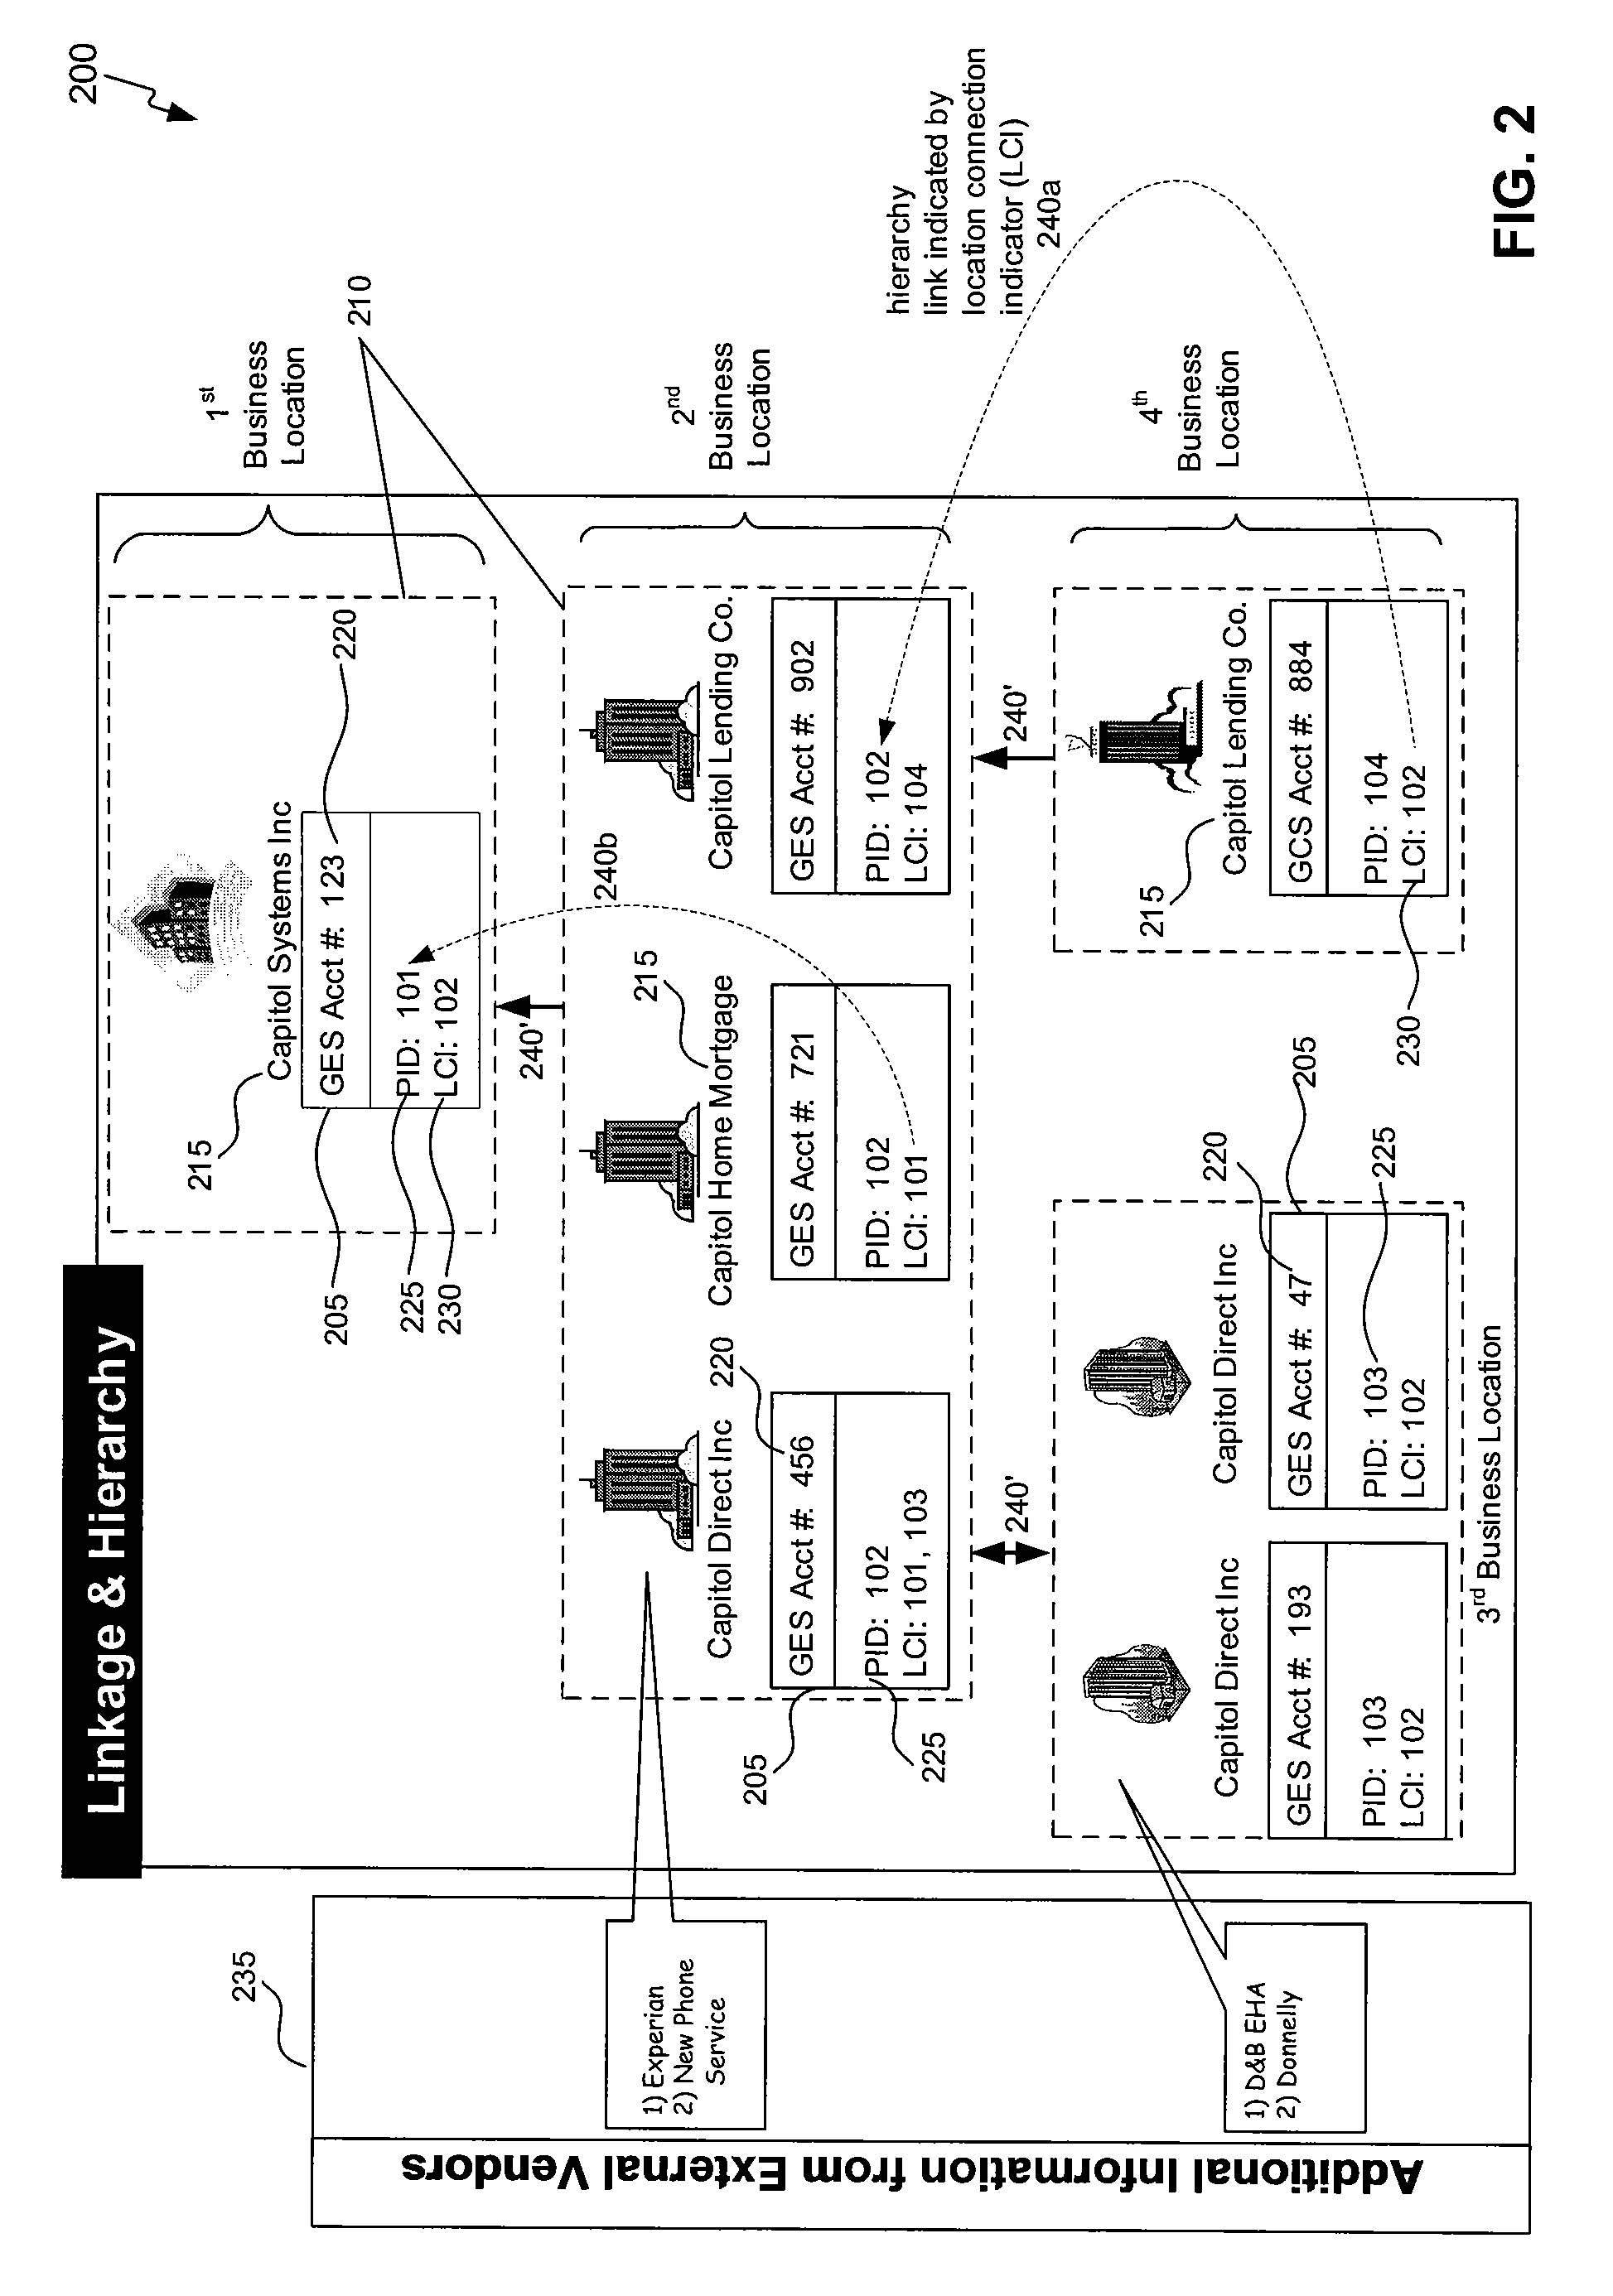 Method, System, and Computer Program Product for Customer Linking and Identification Capability for Institutions